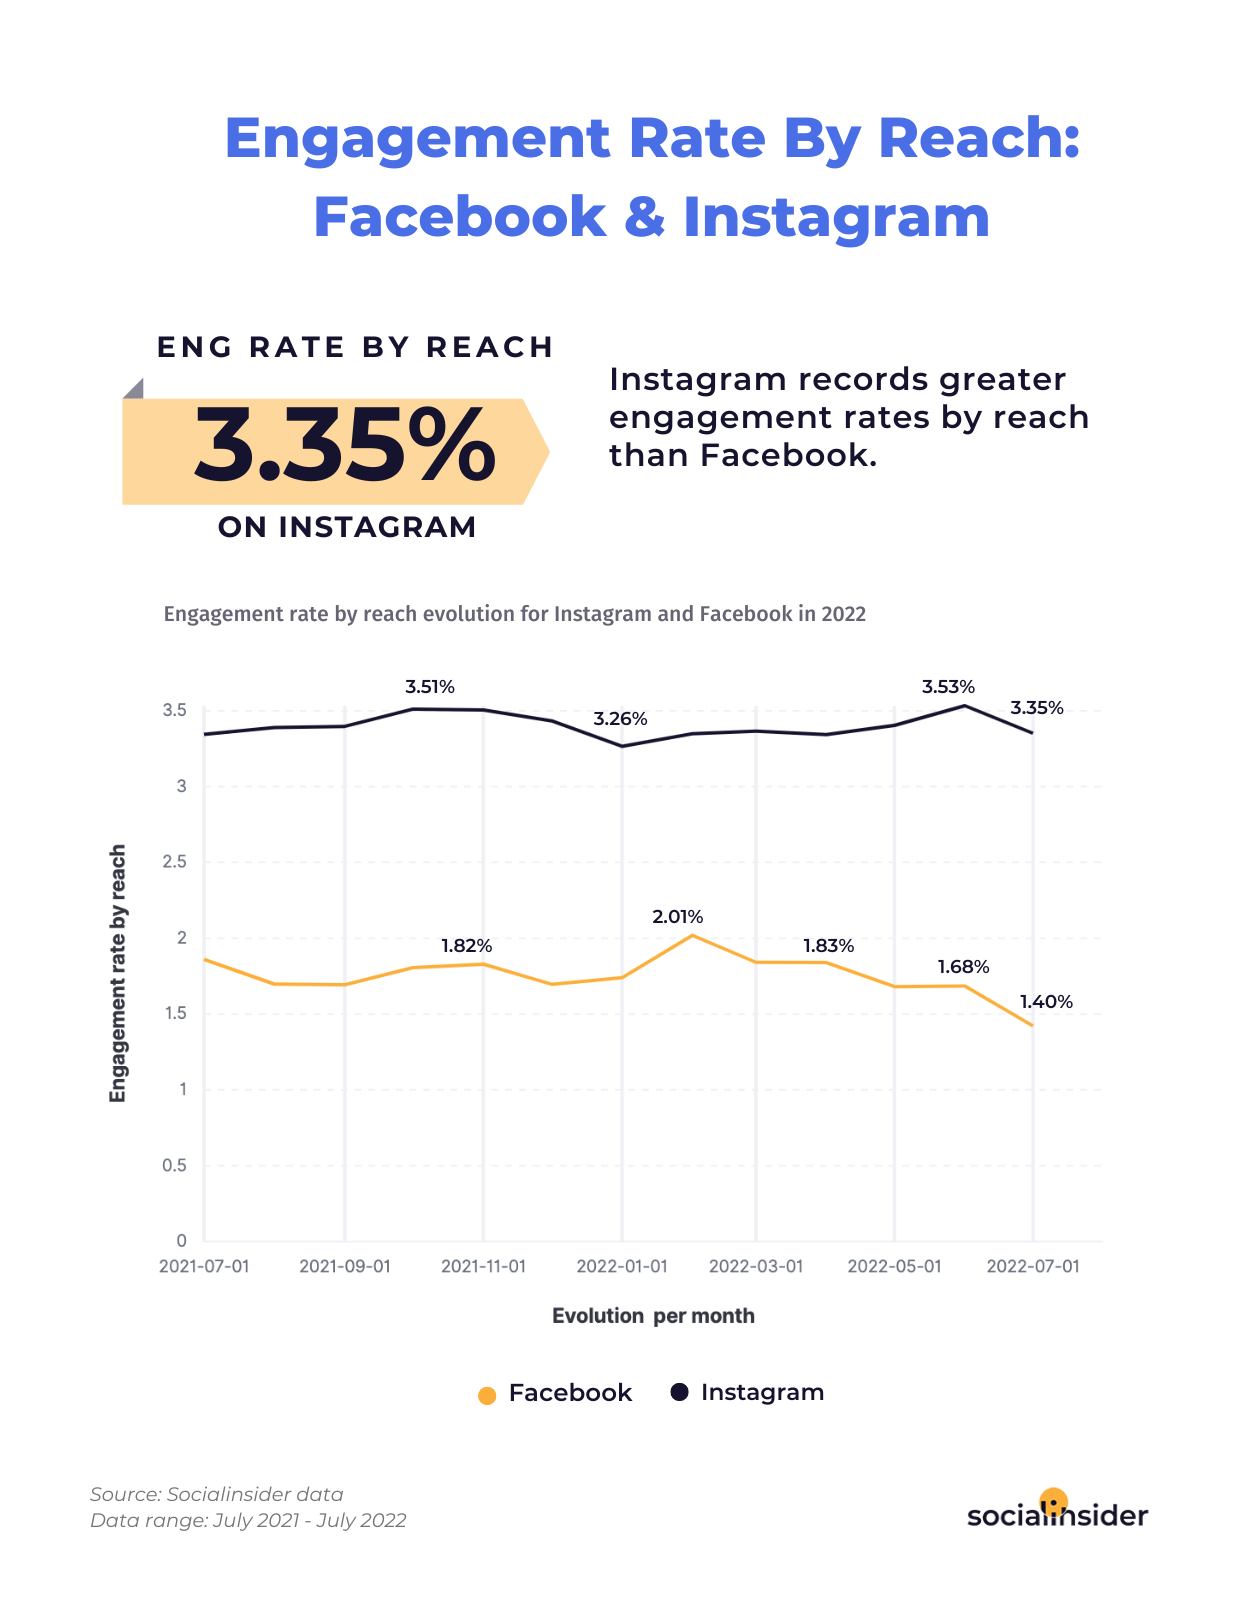 This is a chart showing what's the engagement rate by reach on Facebook and Instagram in 2022.